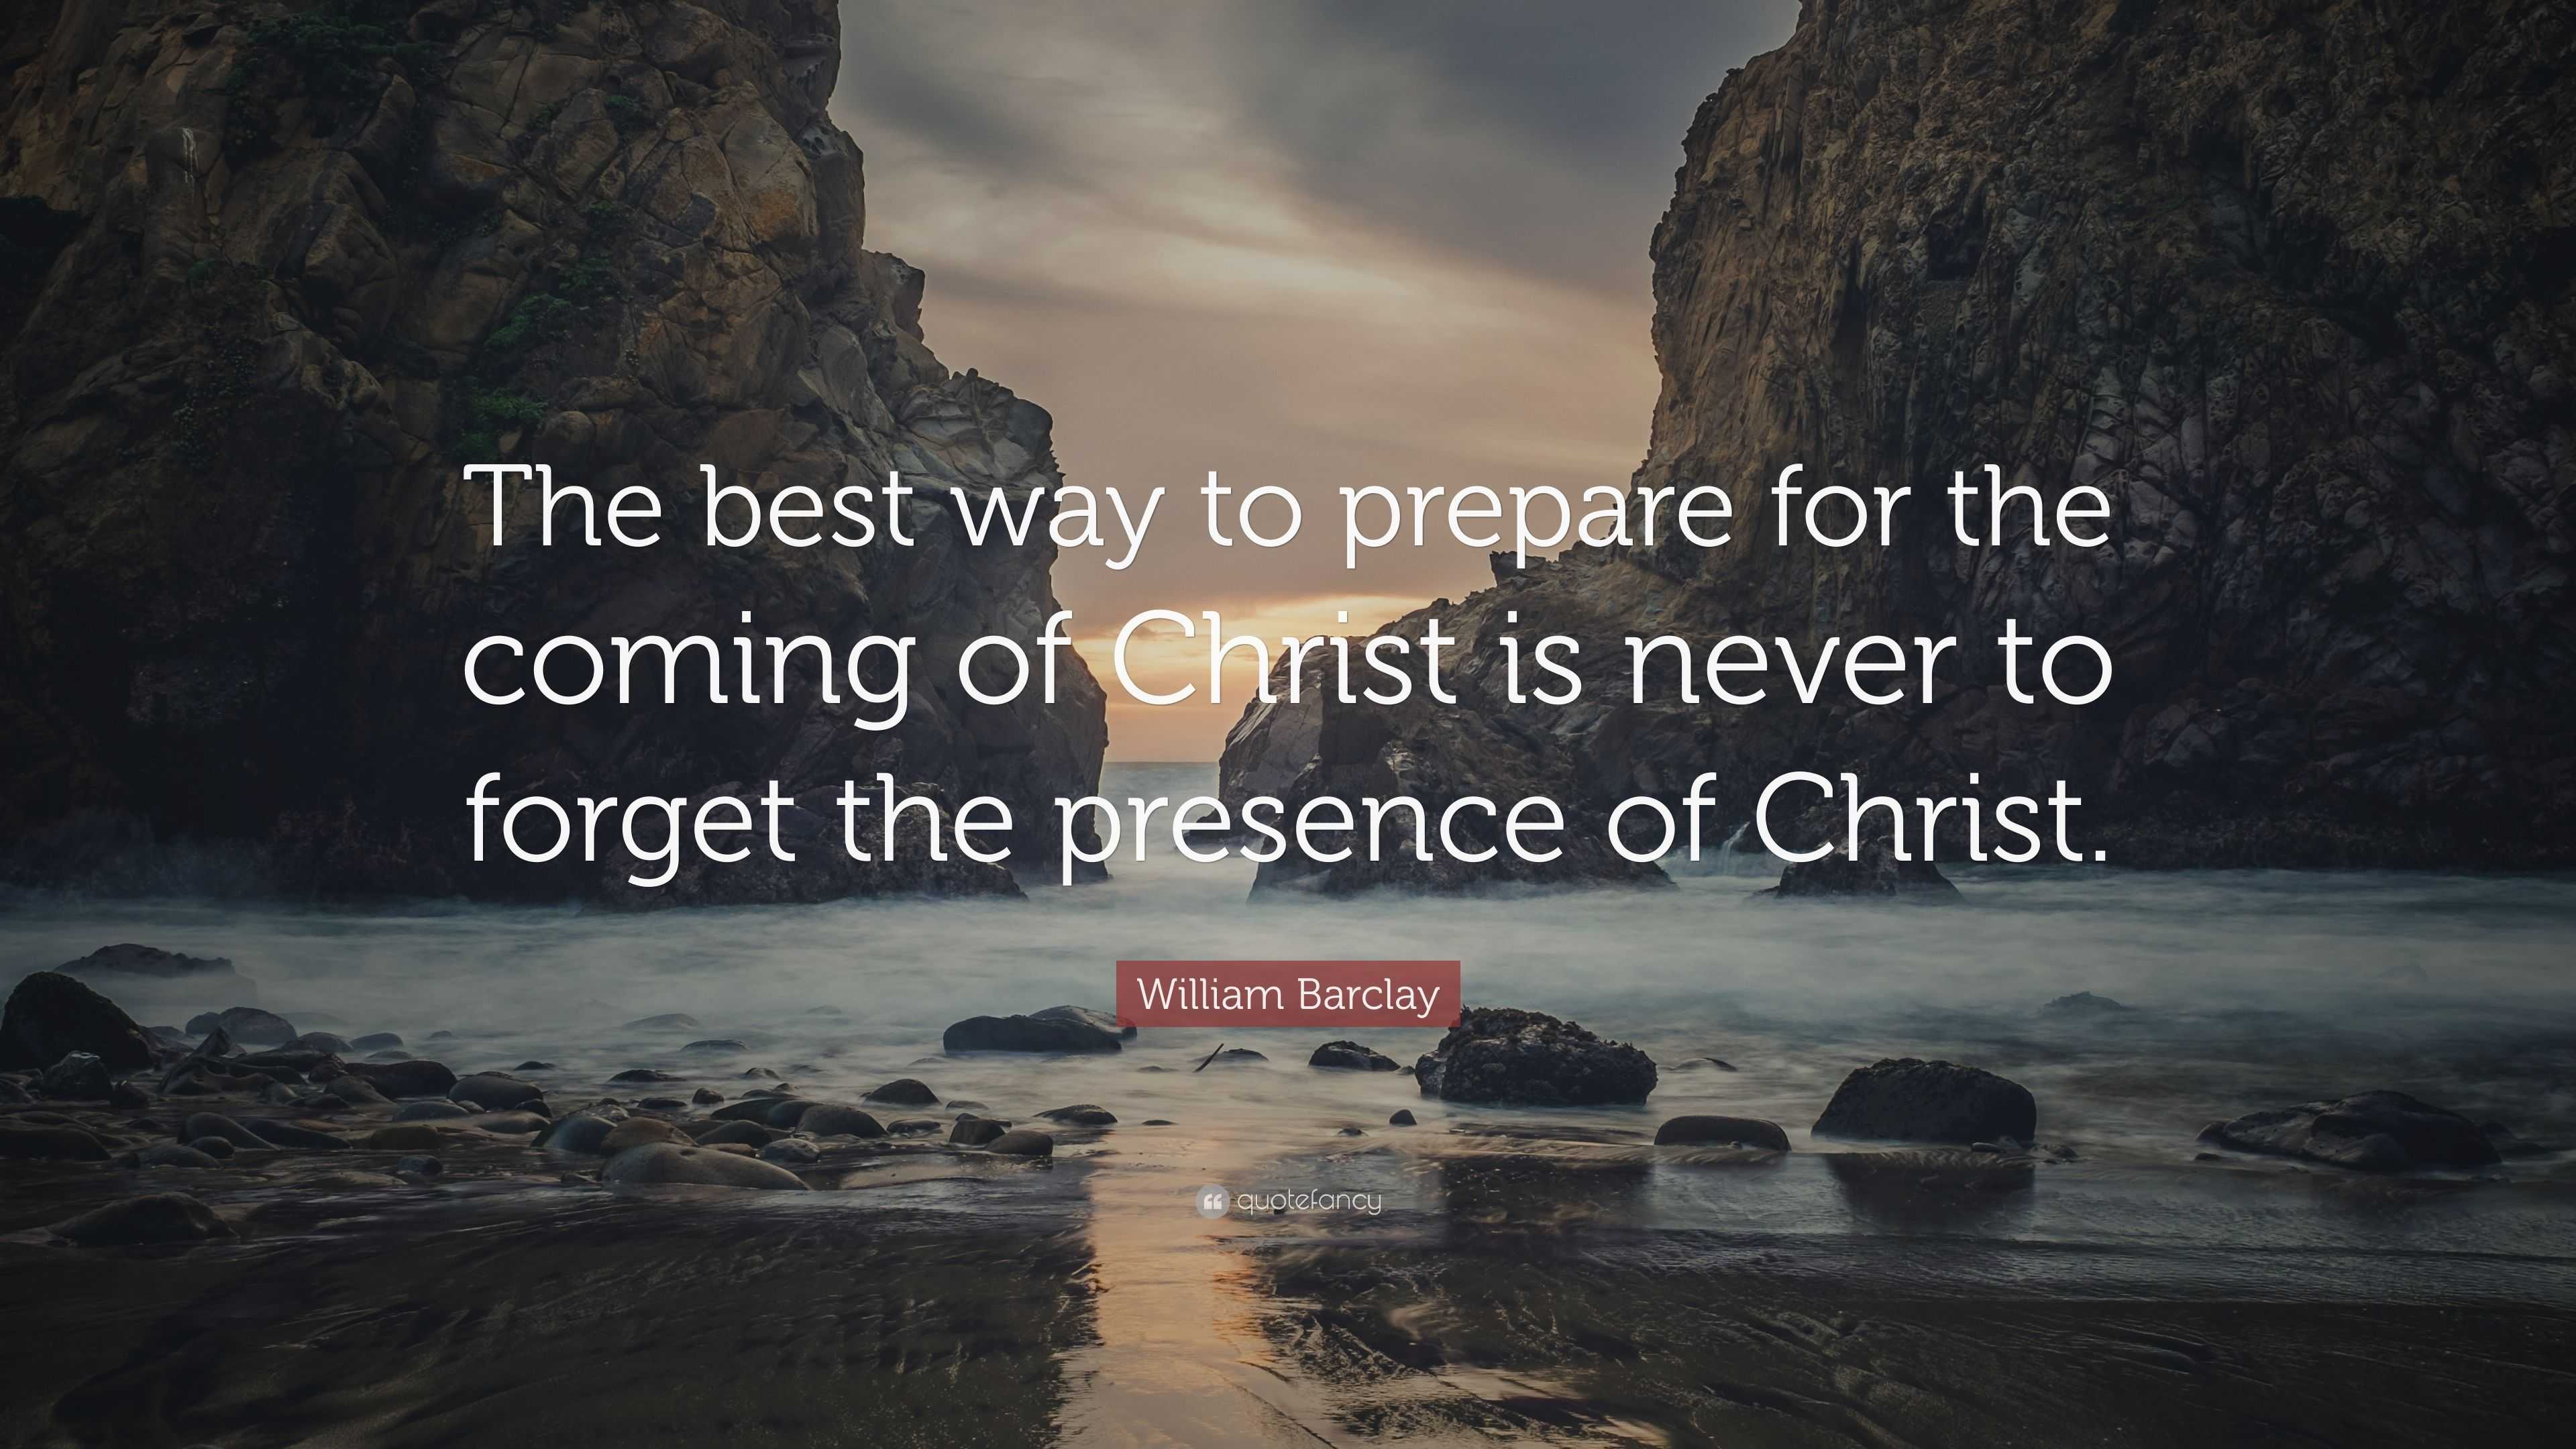 William Barclay Quote: "The best way to prepare for the ...